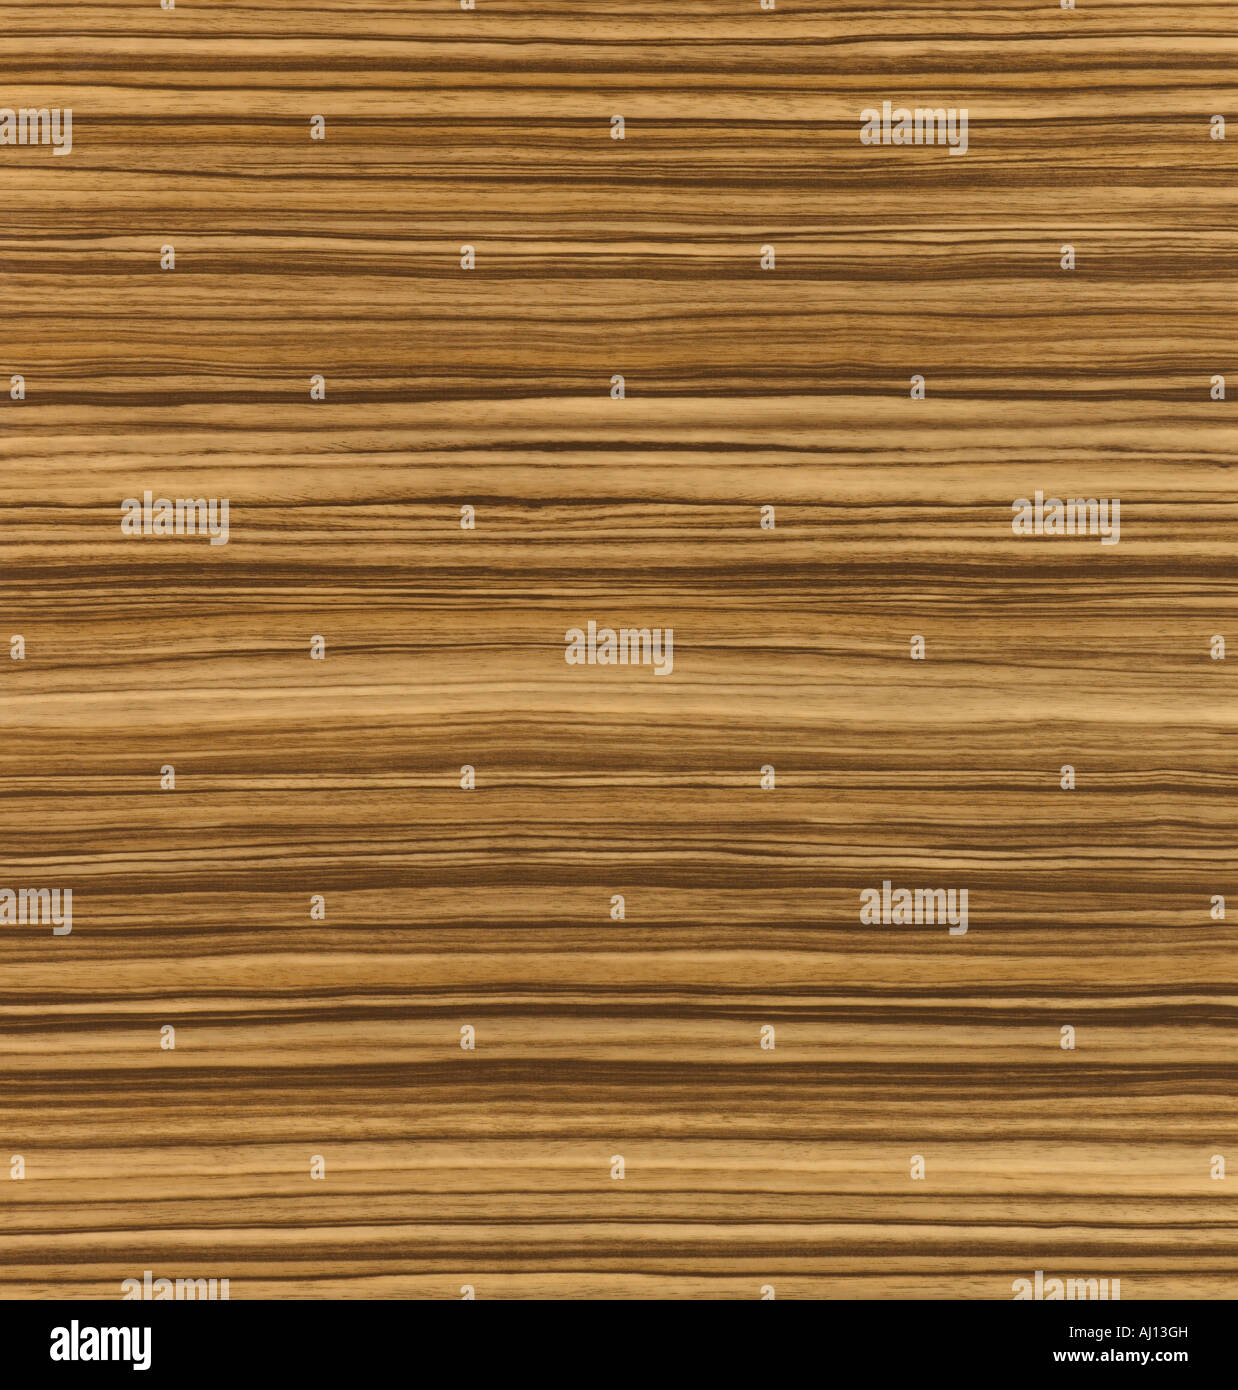 BROWN ABSTRACT TIMBER OAK WOOD GRAIN BACKGROUND Stock Photo